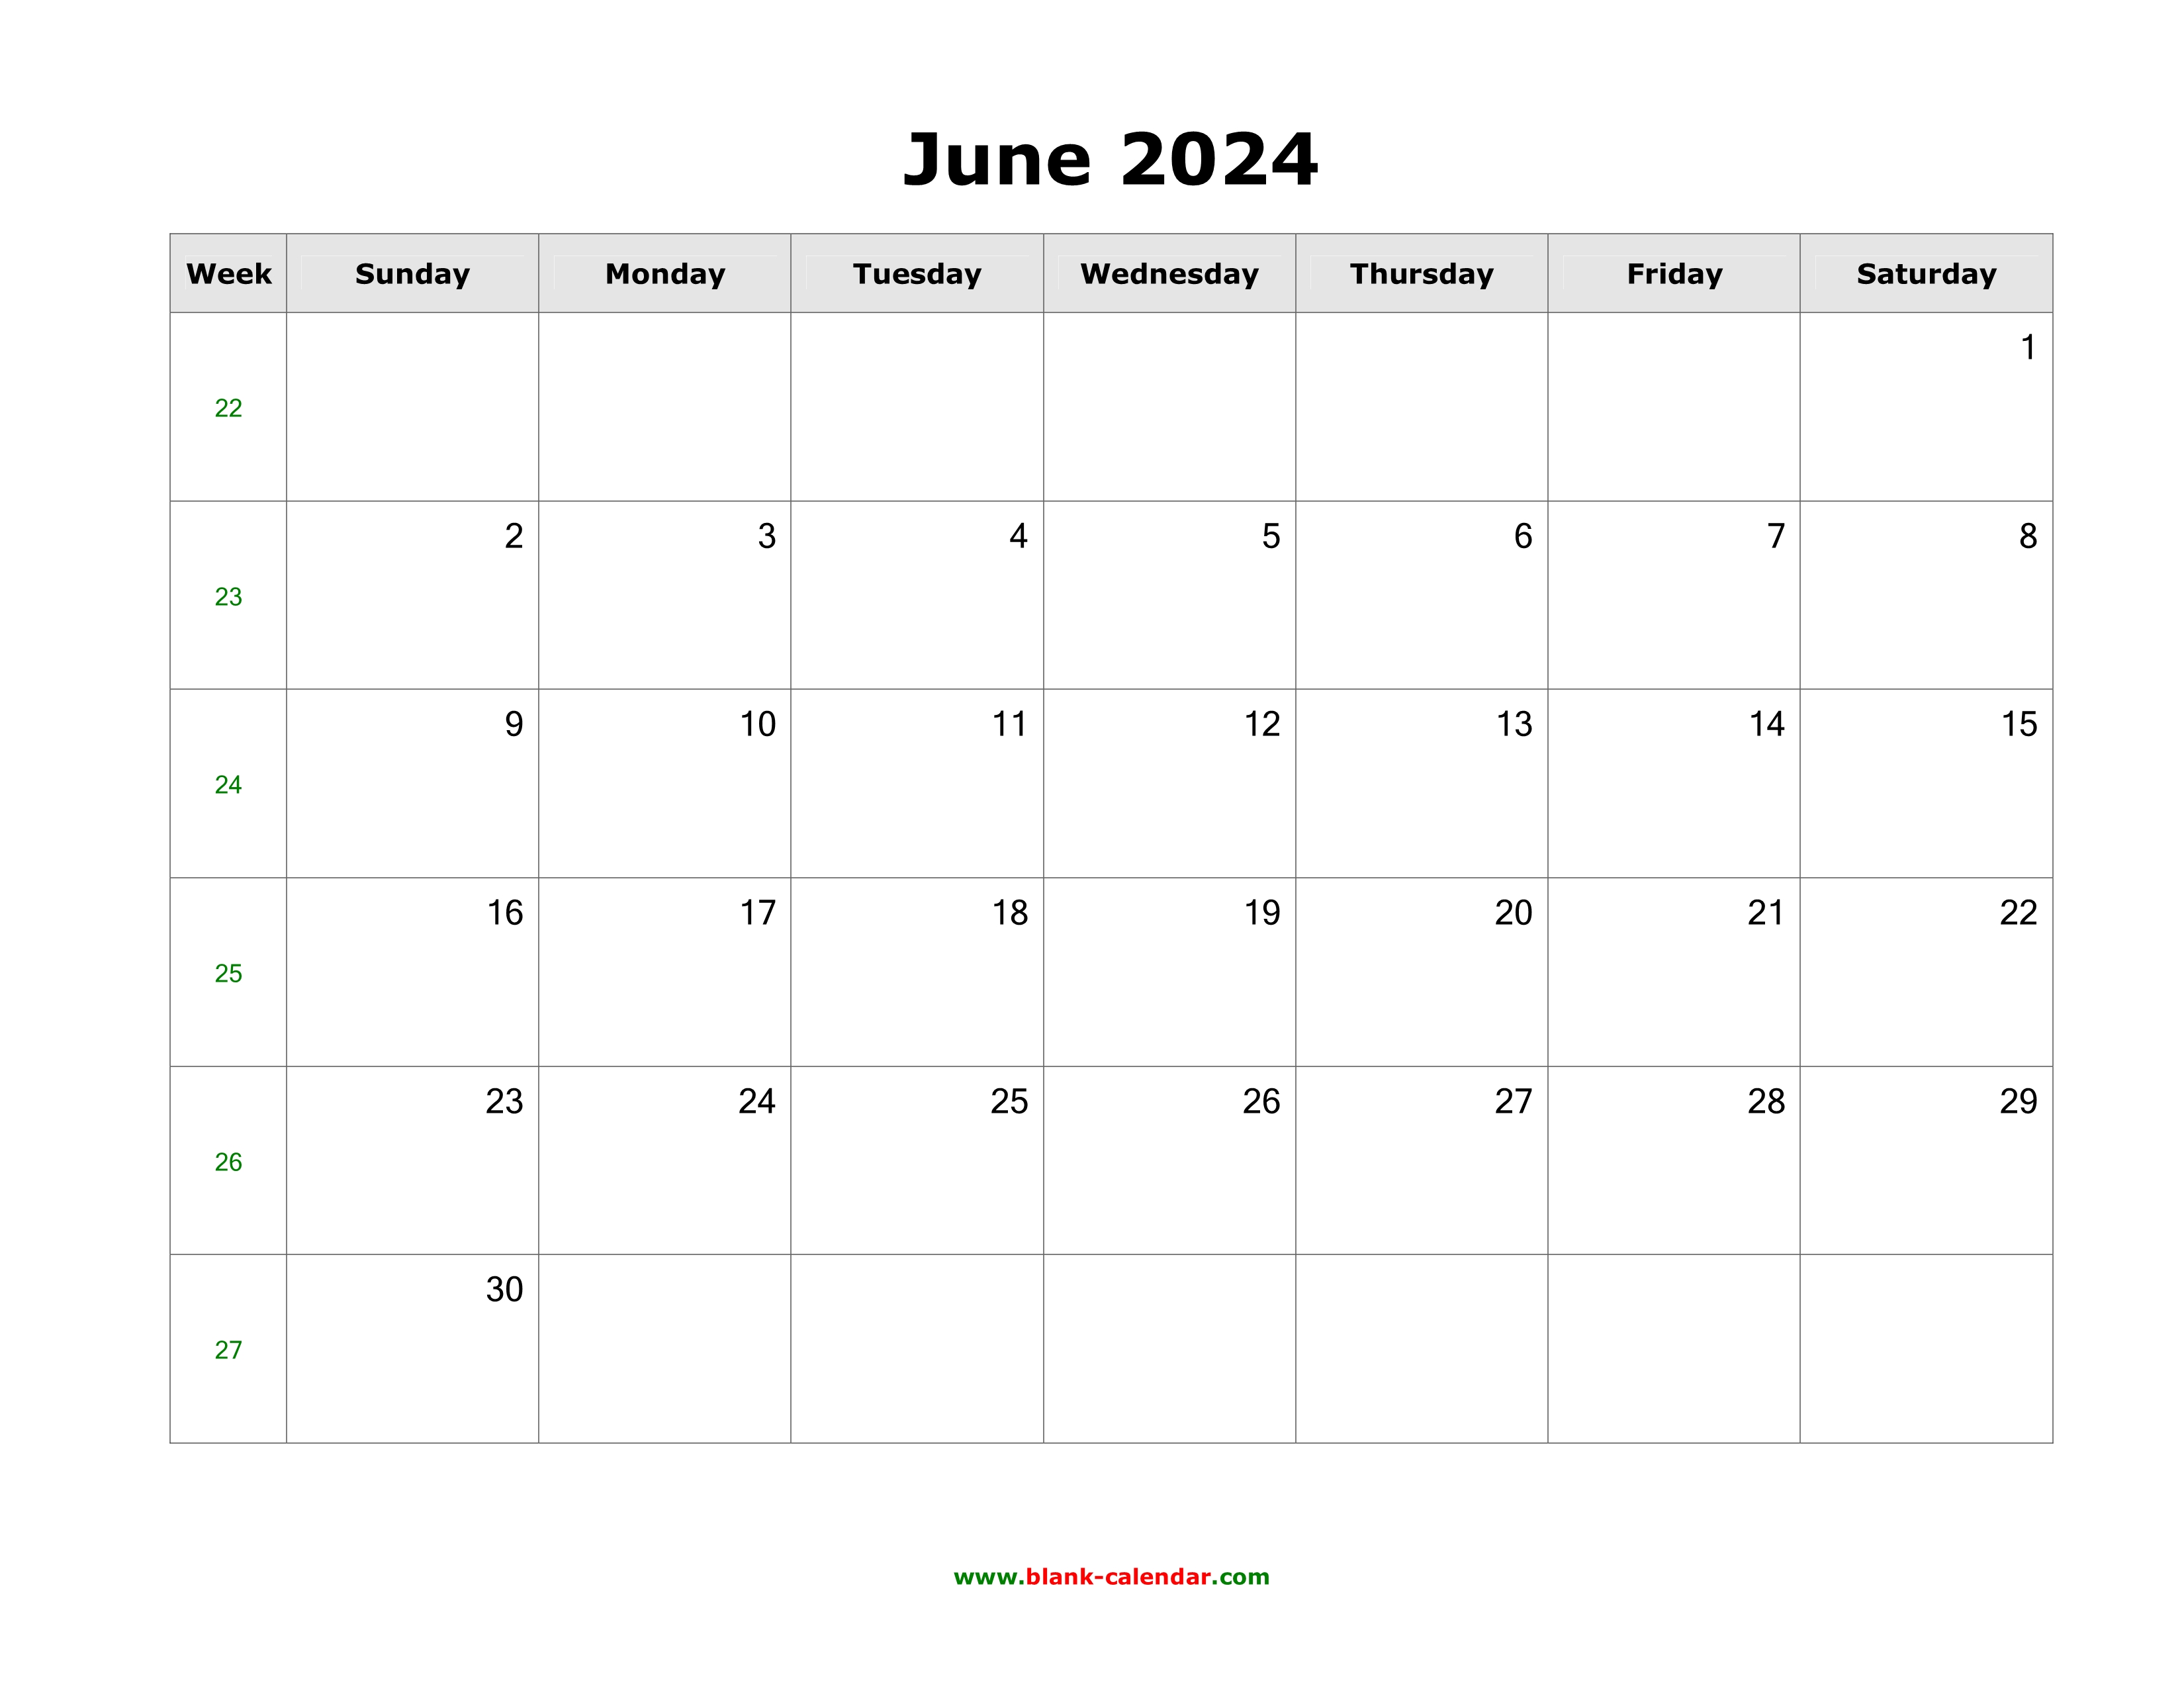 Download June 2024 Blank Calendar with US Holidays (horizontal)